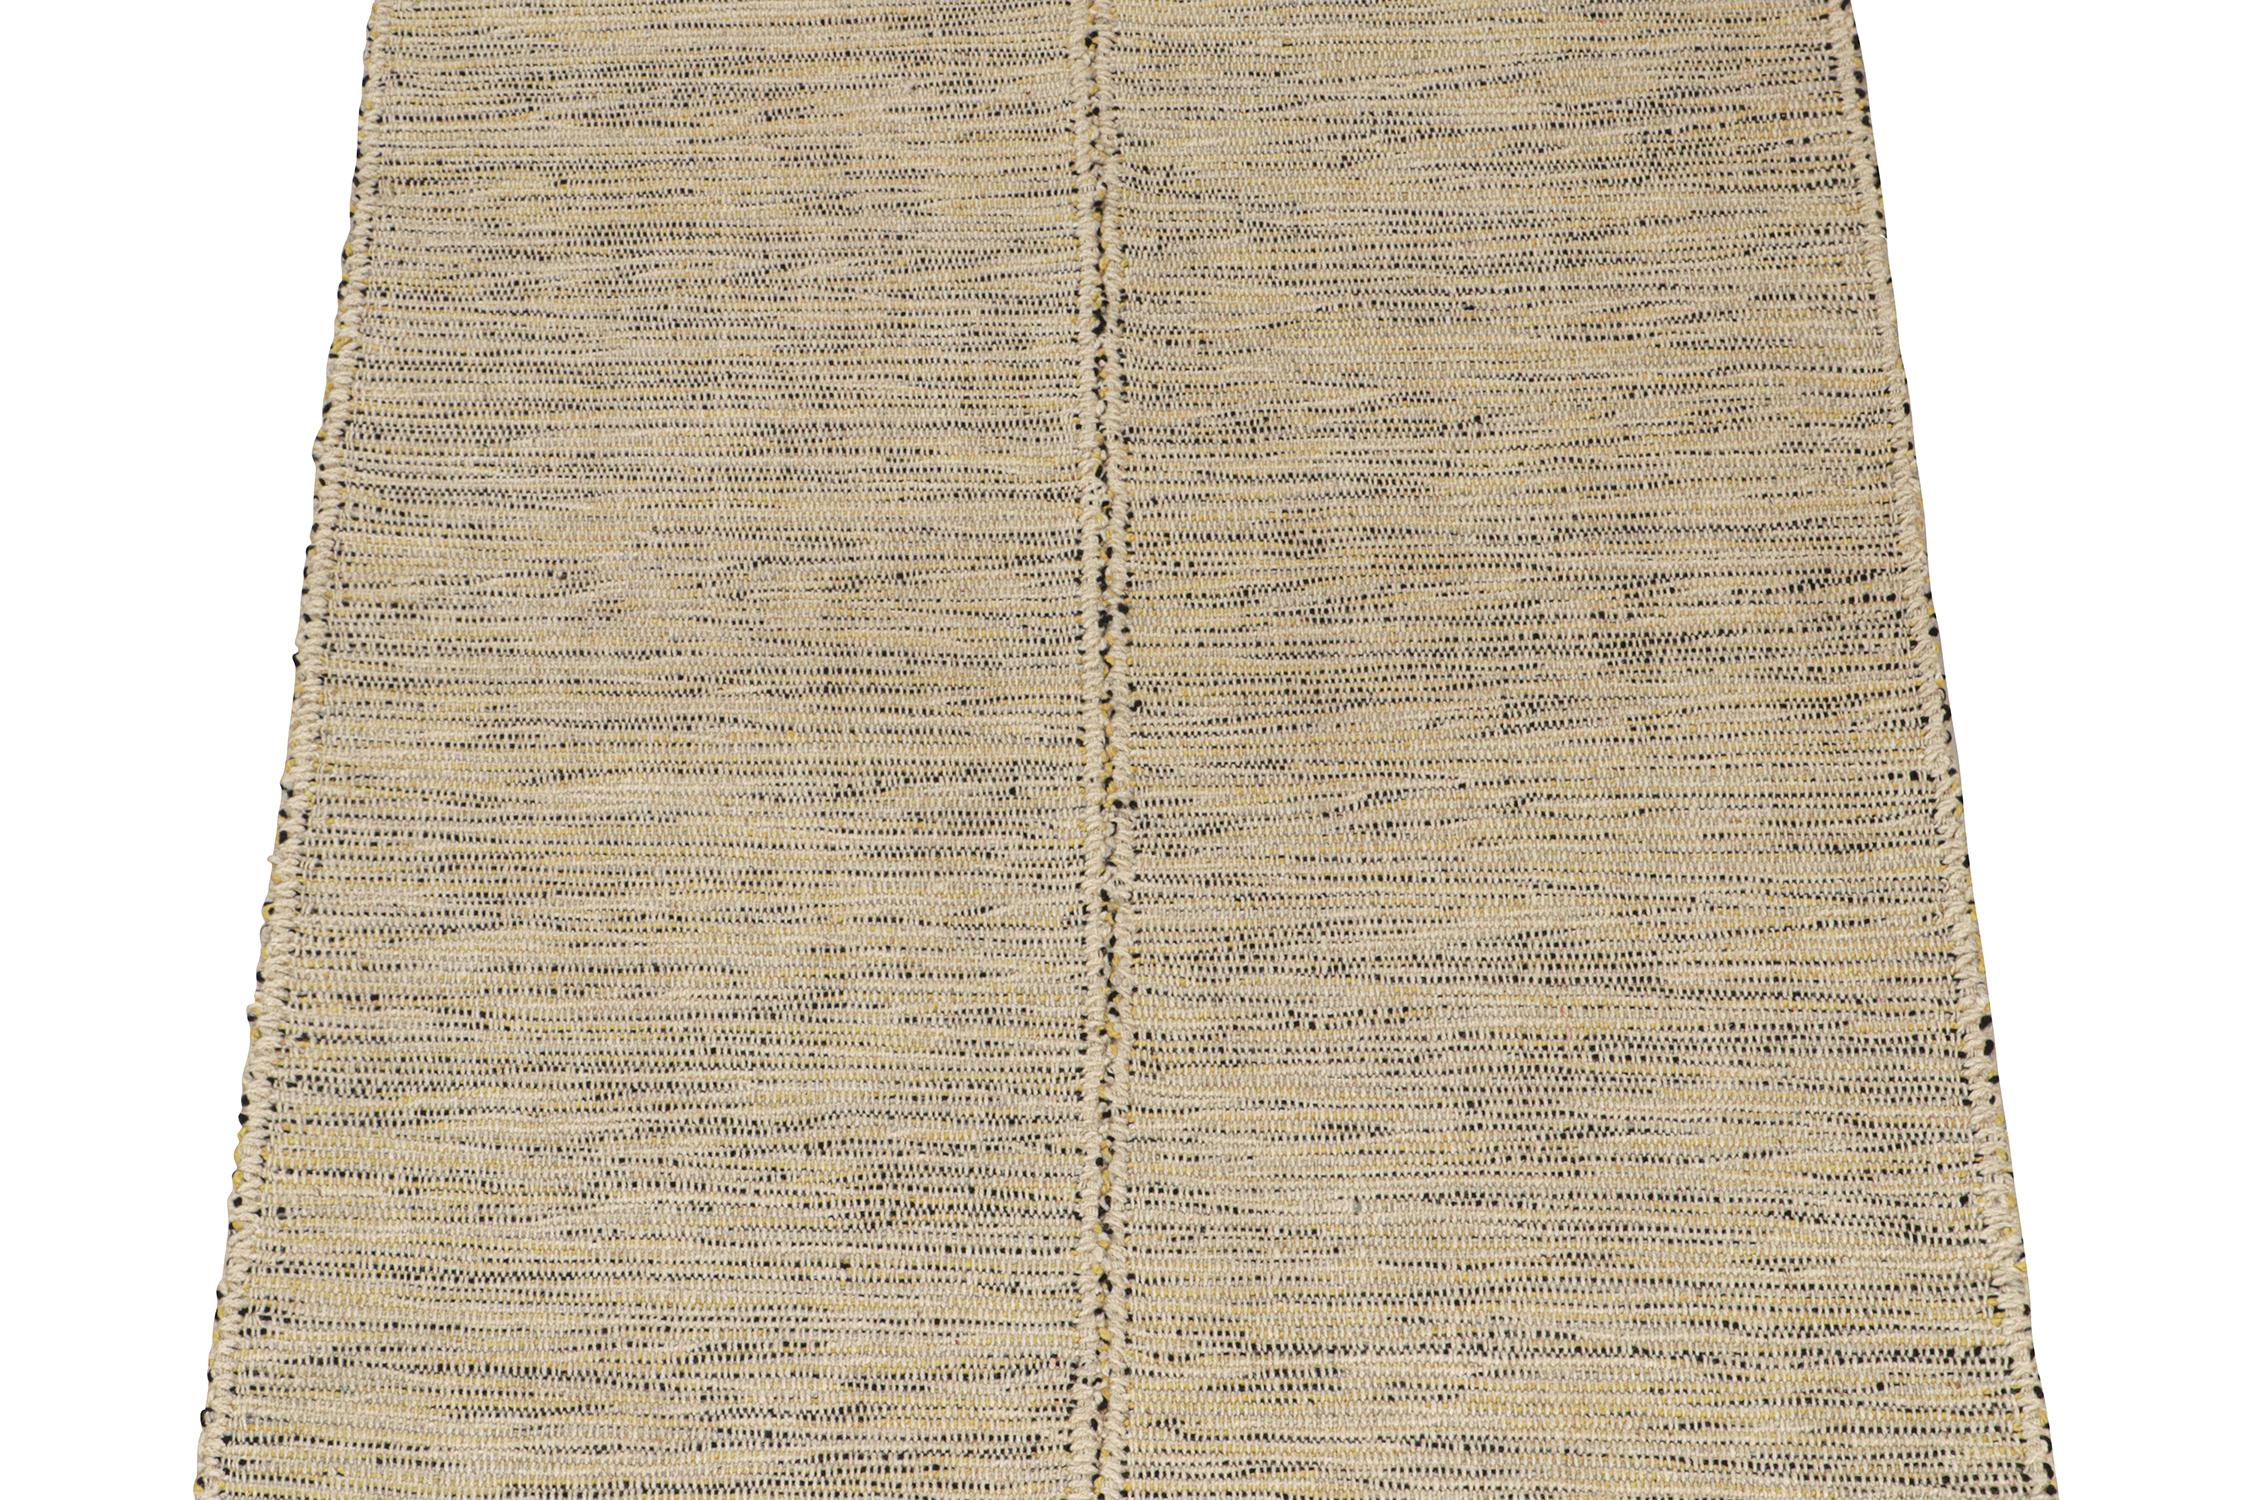 Handwoven in wool, this 4x5 Kilim is from a bold new line of contemporary flatweaves by Rug & Kilim.
Further on the Design:

The “Rez Kilim” connotes a modern take on classic panel weaving. This edition enjoys comfortable tones of beige with yellow